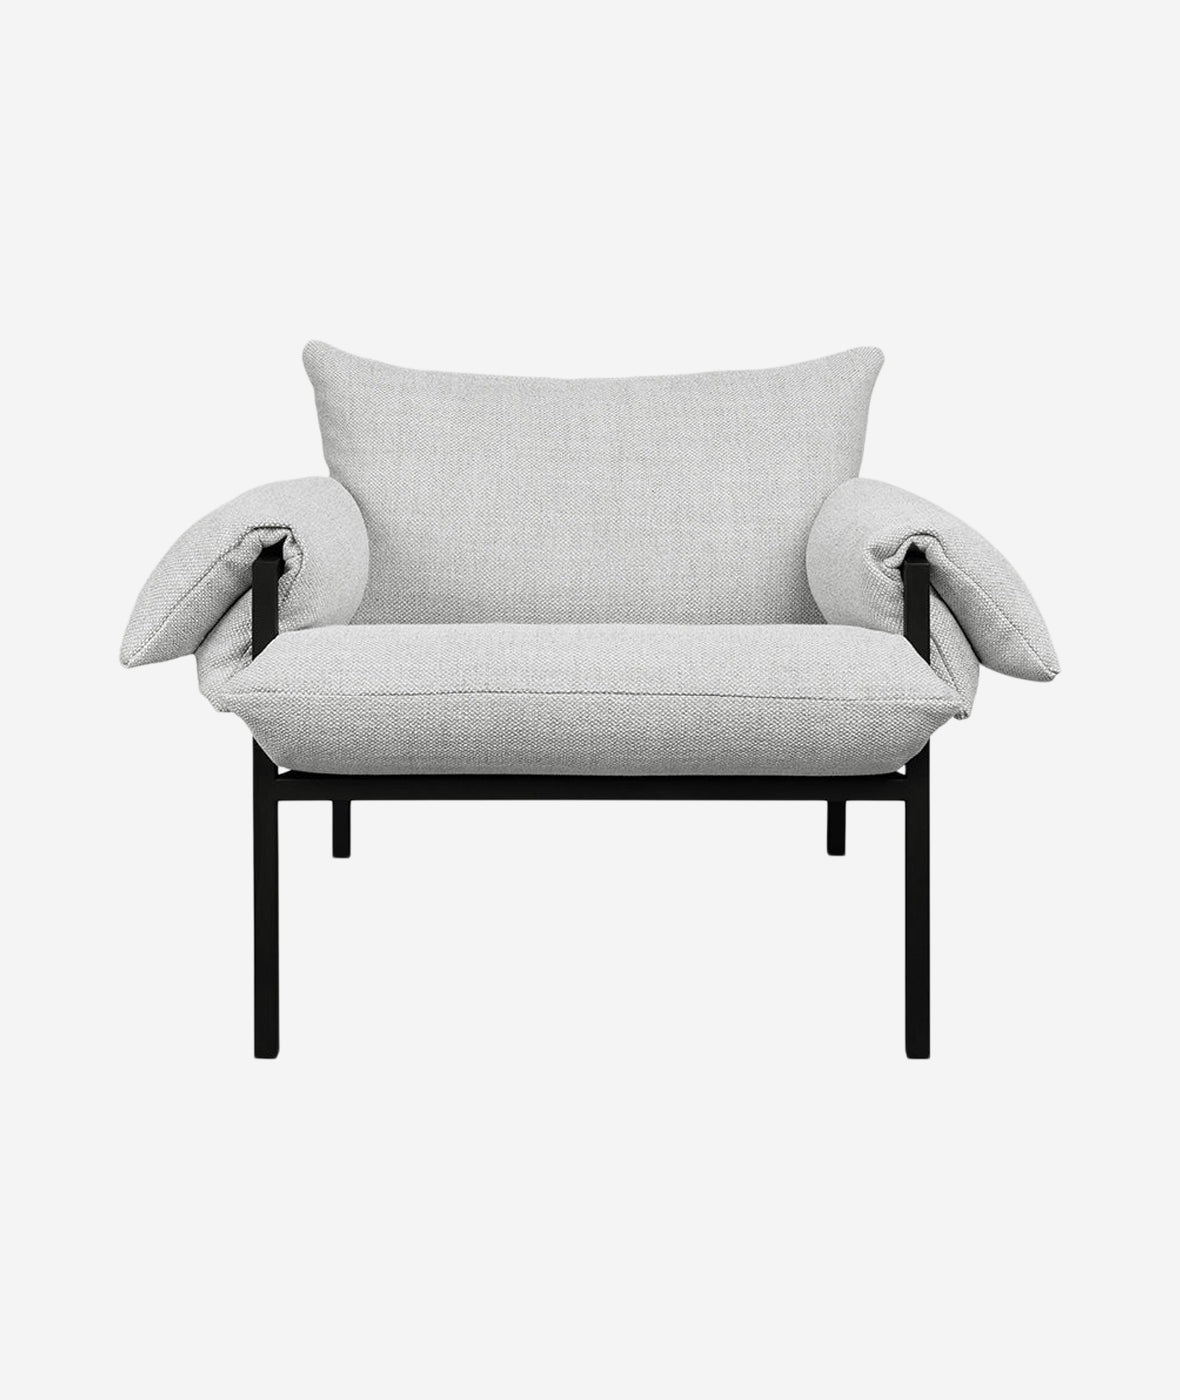 Fulton Lounge Chair - More Options